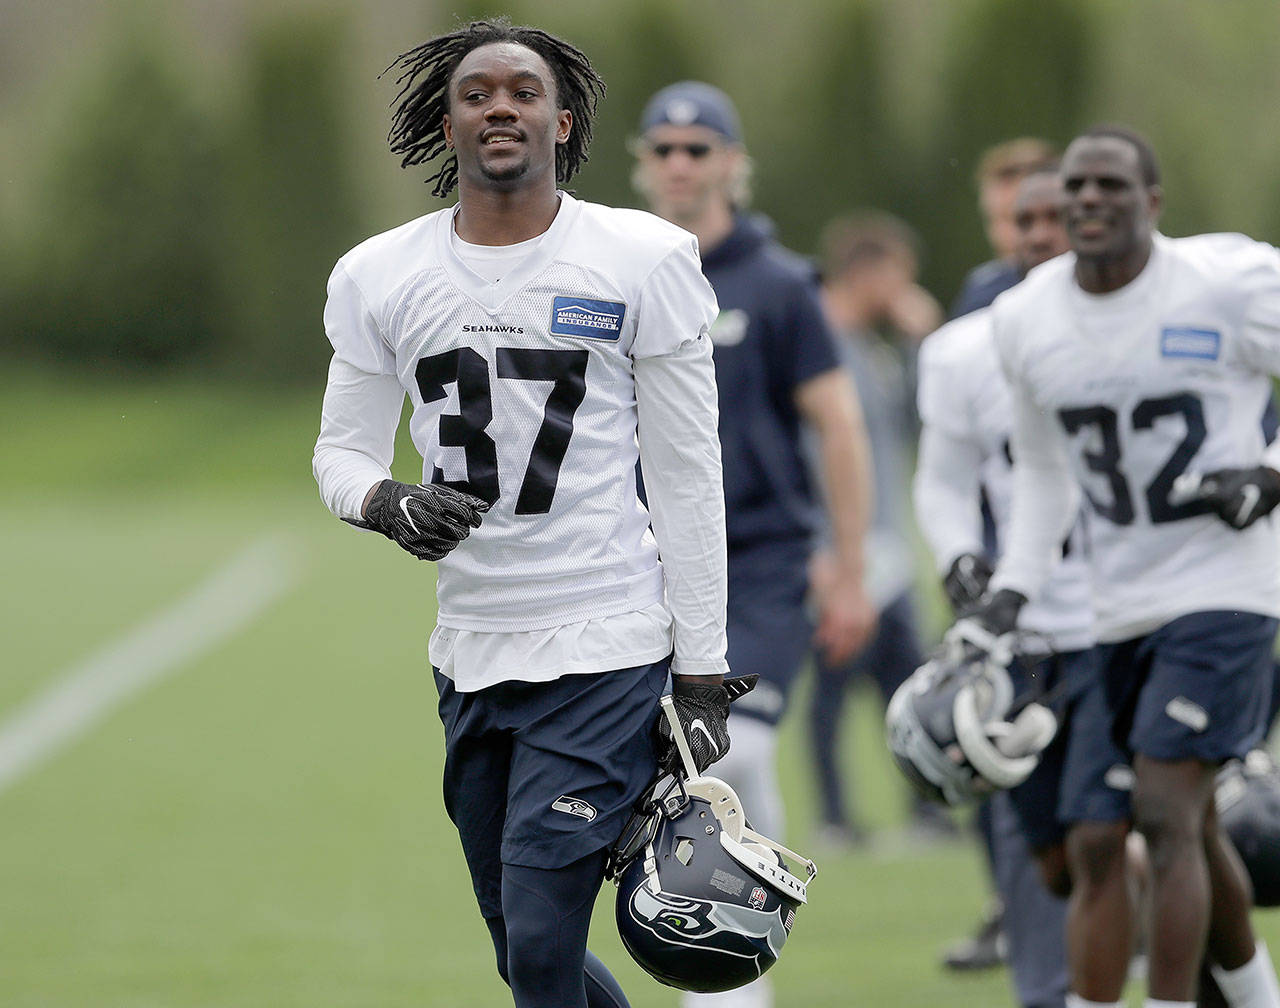 Seattle Seahawks rookie cornerback Tre Flowers (37) runs in from the field, Friday, May 4, after NFL rookie camp in Renton, Wash. The Seahawks announced Flowers signed his rookie contract Thursday. (Ted S. Warren / Associated Press)